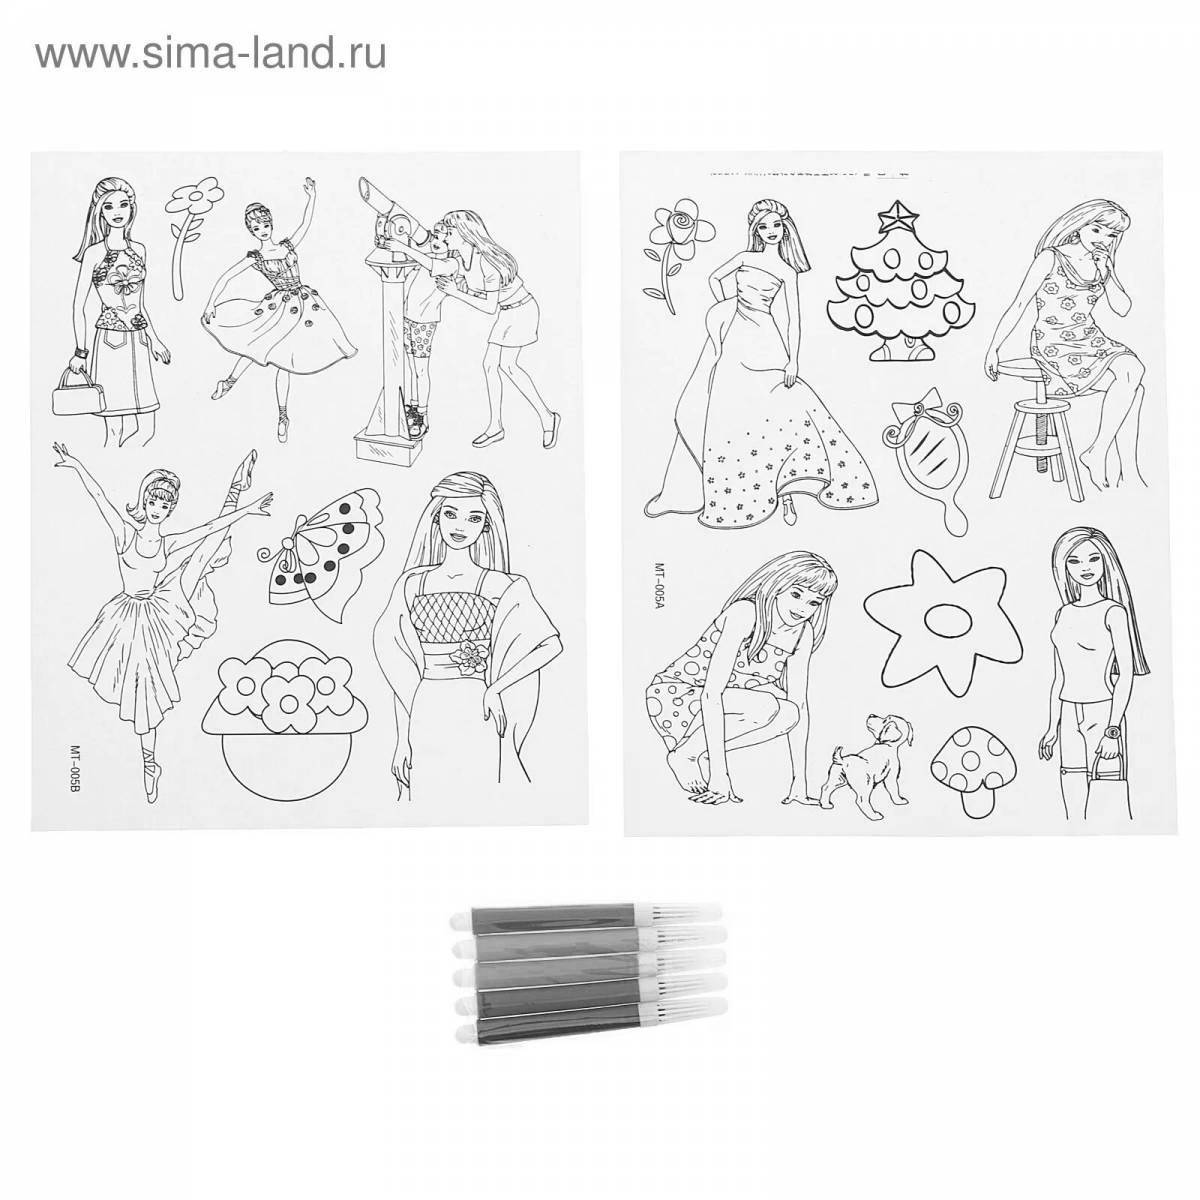 Internet store of fascinating coloring pages